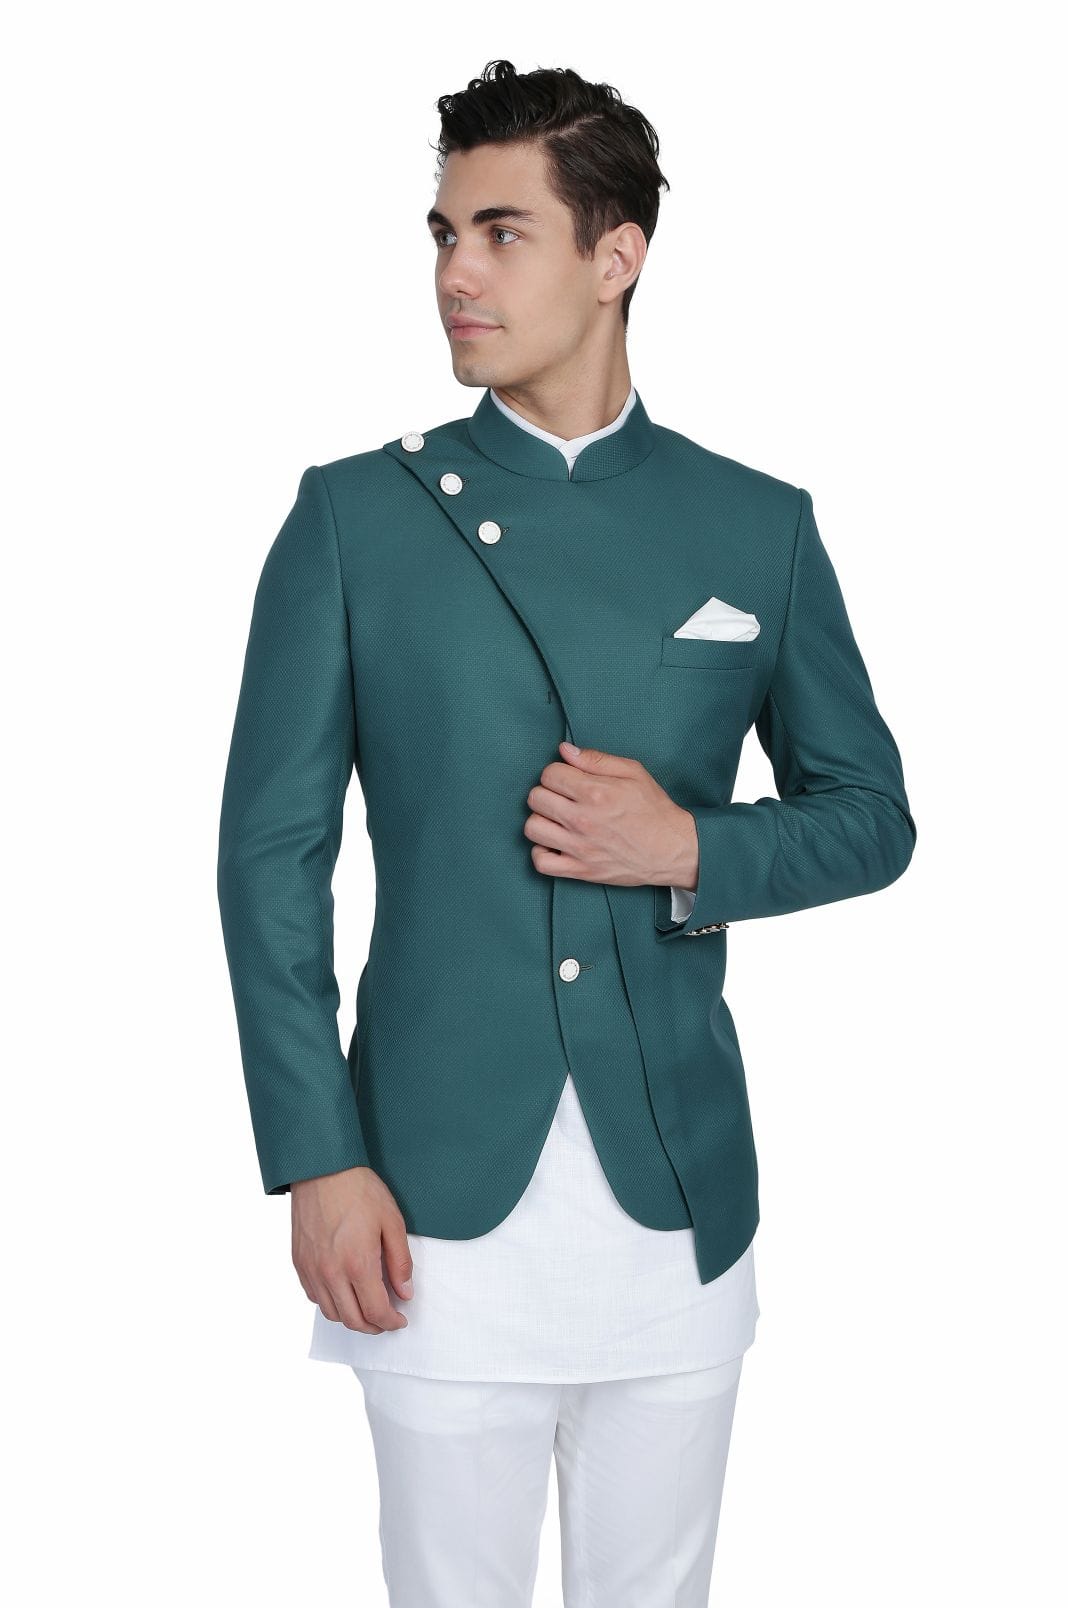 Buy The Rich Look Designer 5 Button Bandhgala/Jodhpuri Suit Casual | Formal  for Men's Available in 5 Size | Bandhgala Suit with Trouser (44, Light Green)  at Amazon.in